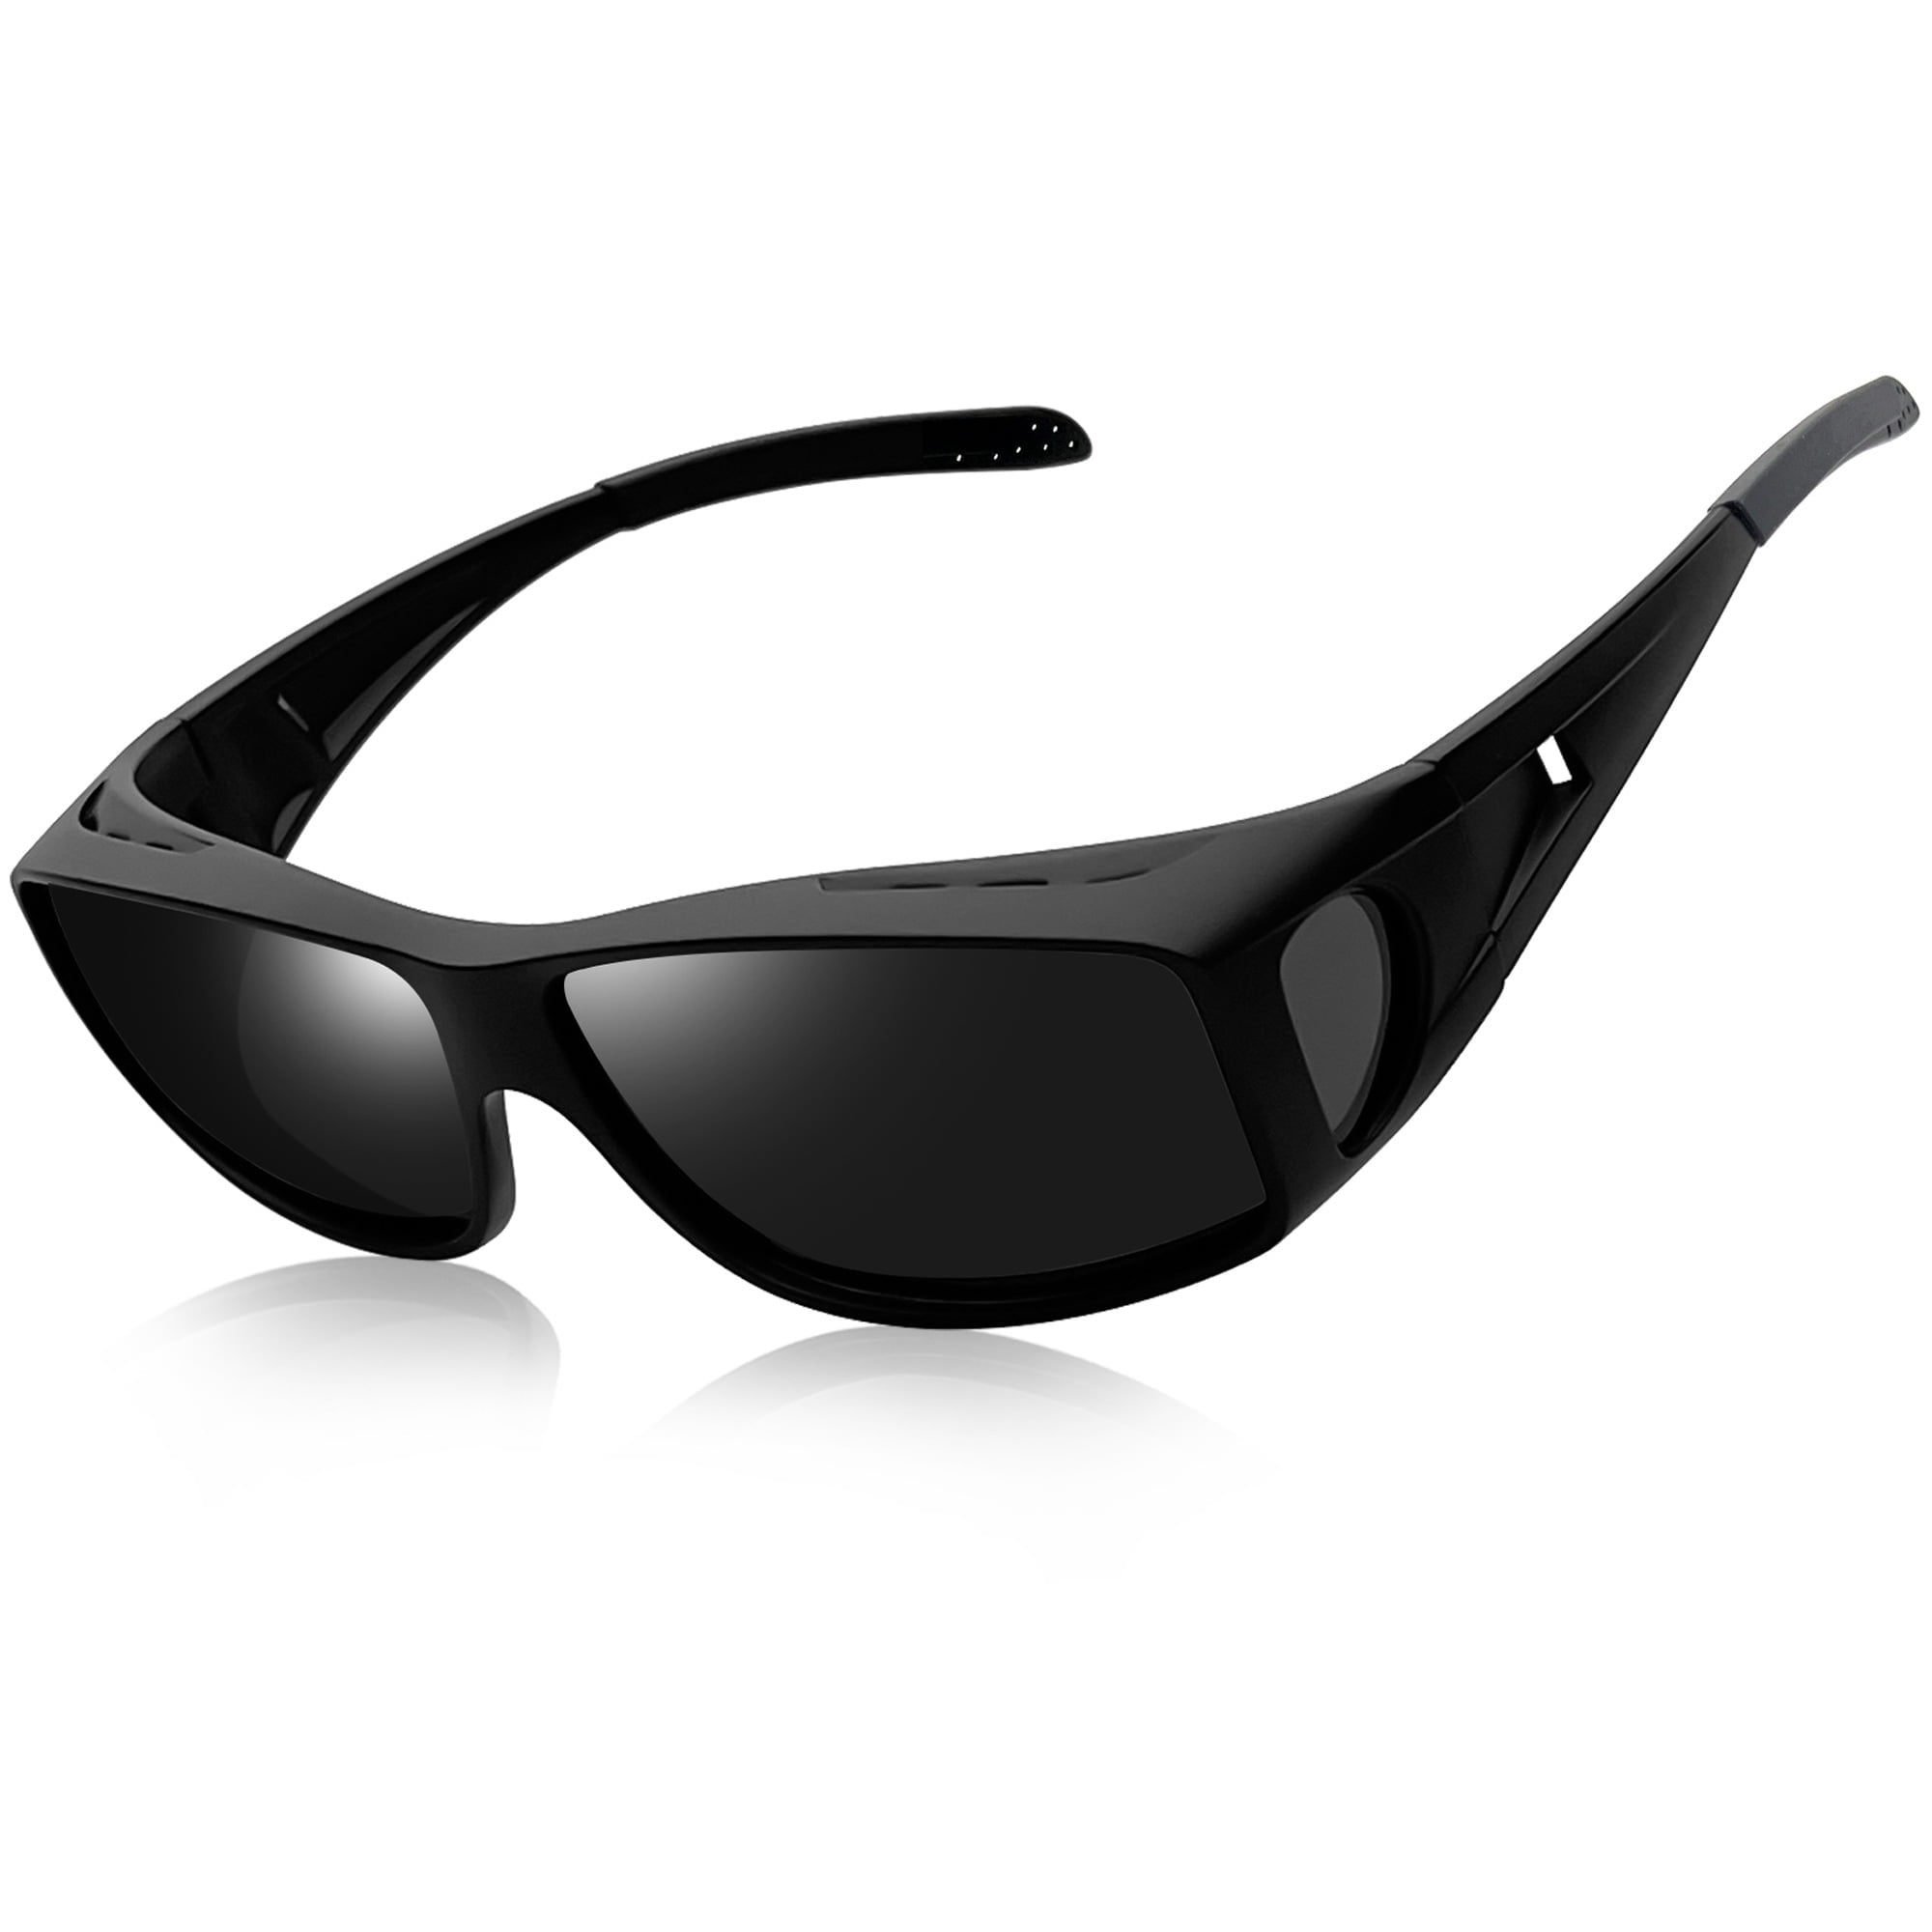 Joopin Sunglasses Fit Over Glasses, Polarized 100% UV Protection